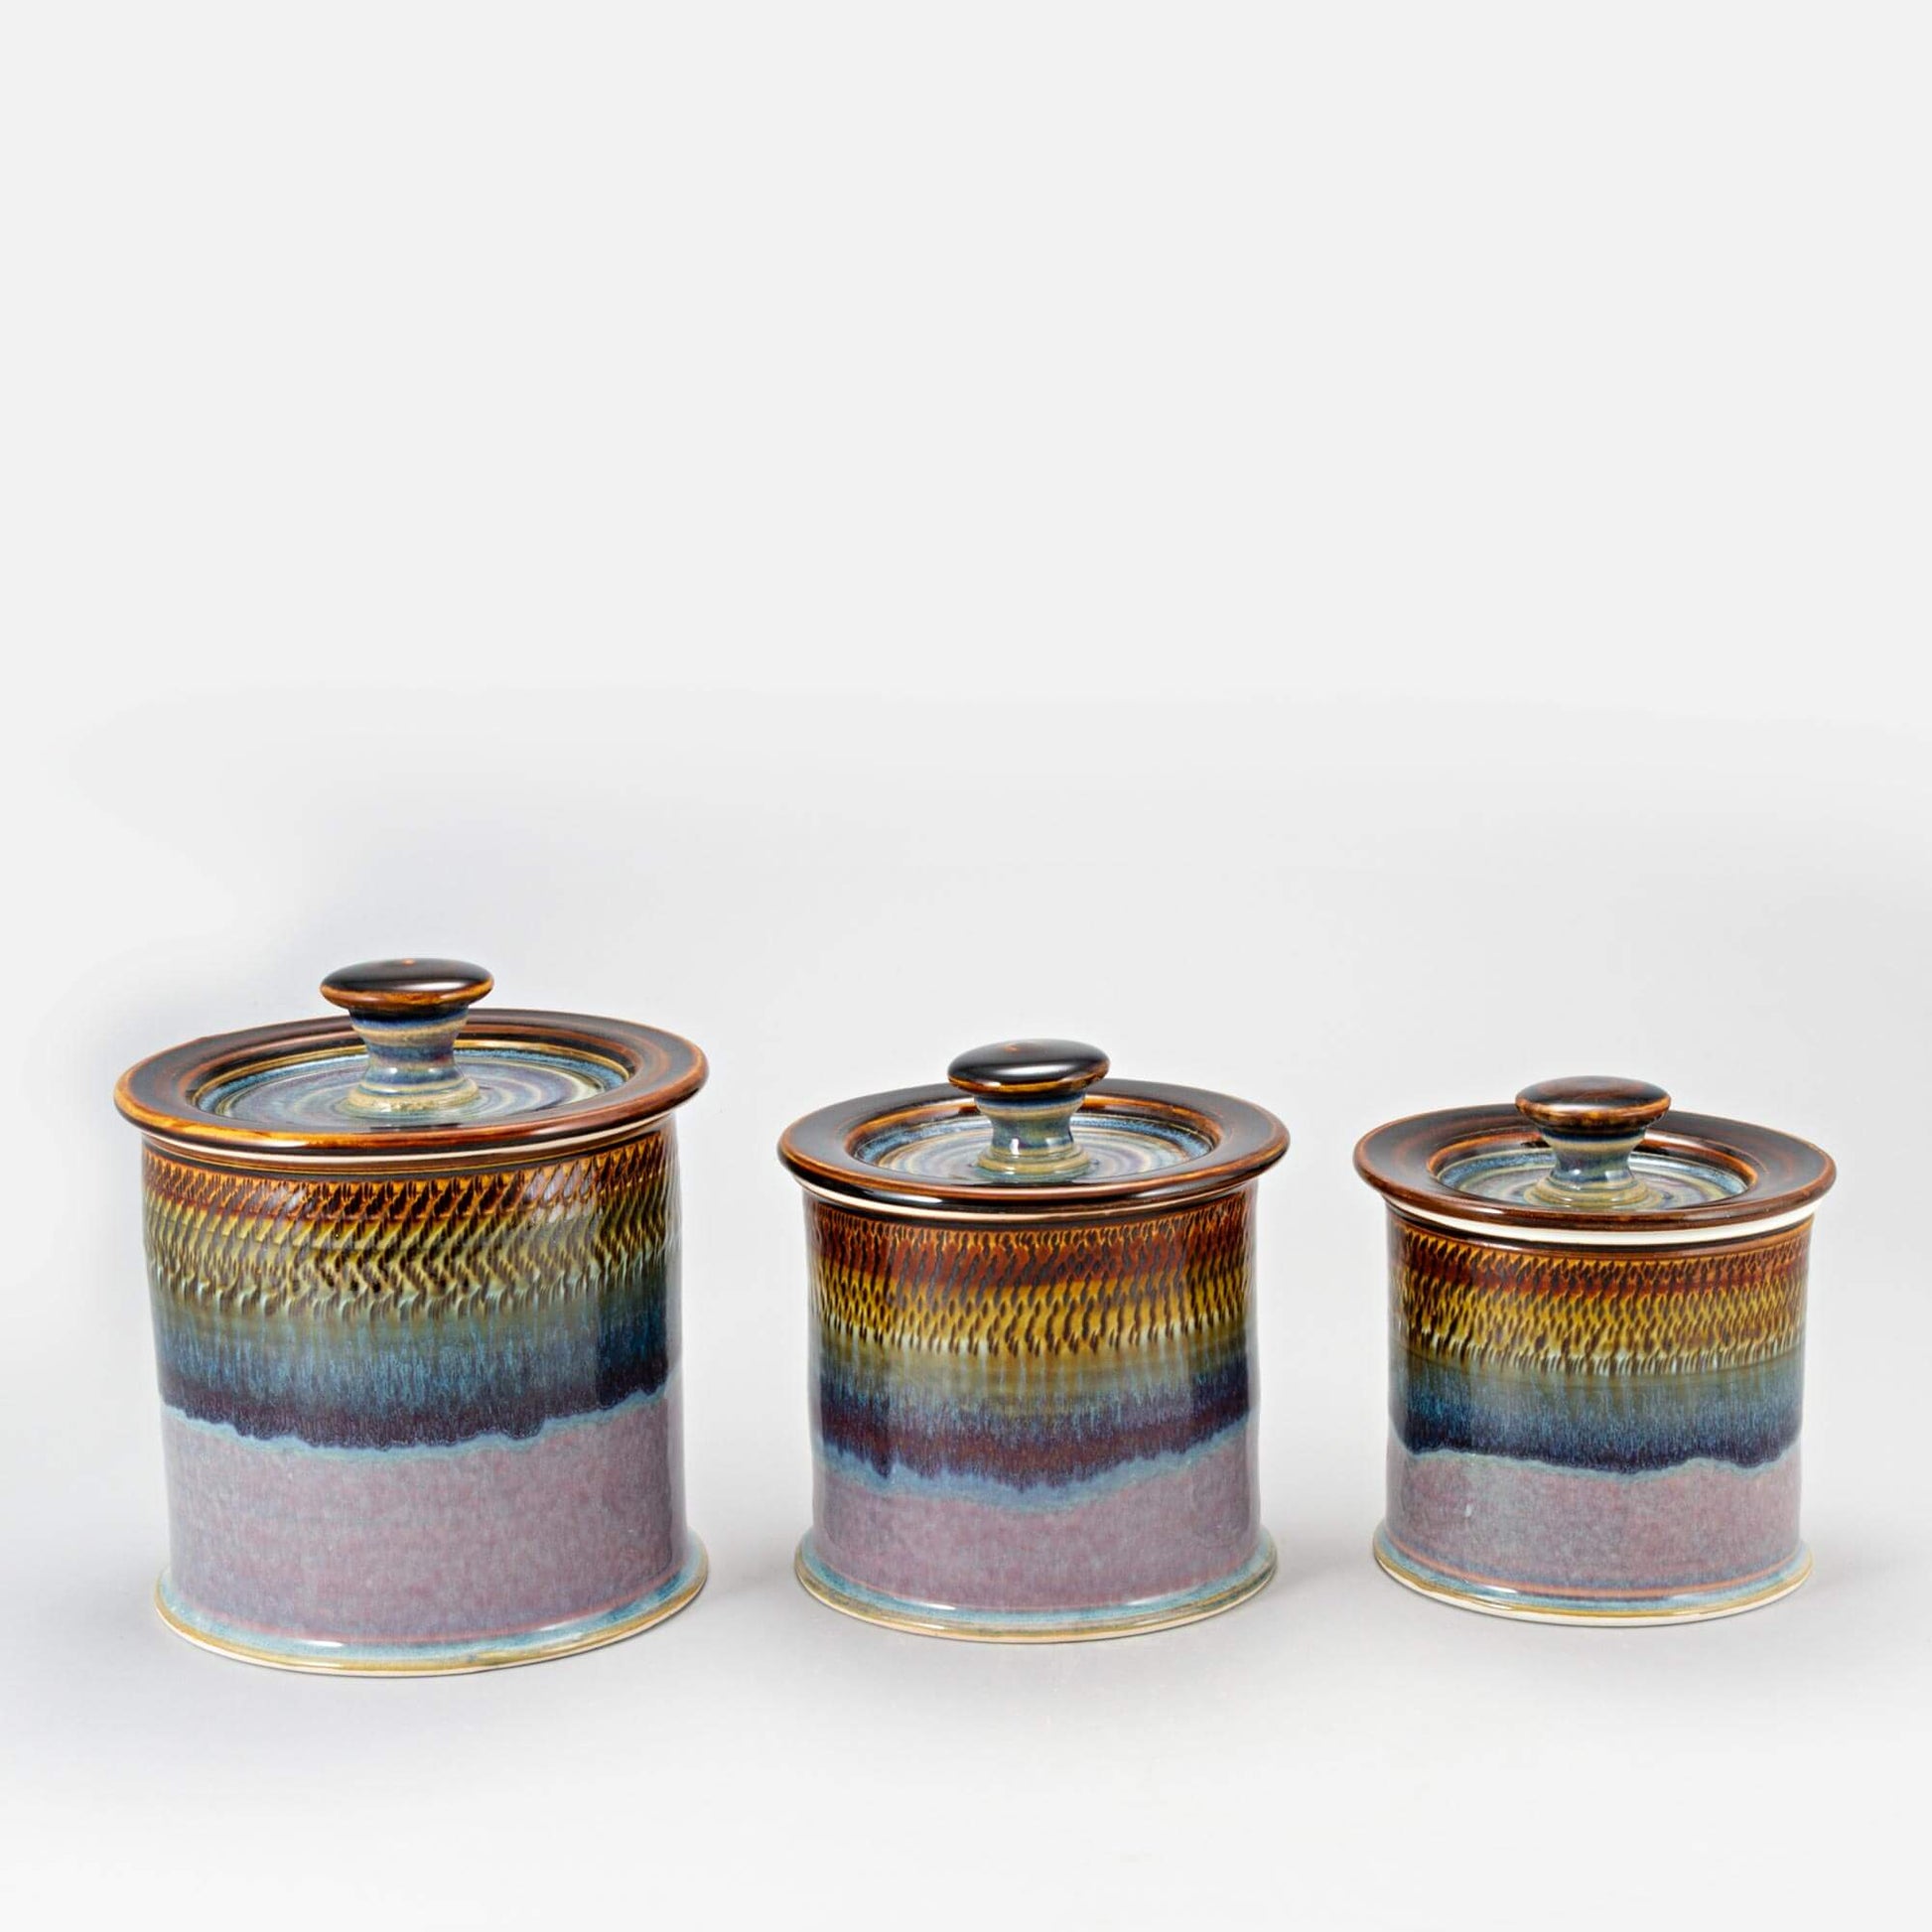 Handmade Pottery Canister Set in Purple Hamada pattern made by Georgetown Pottery in Maine